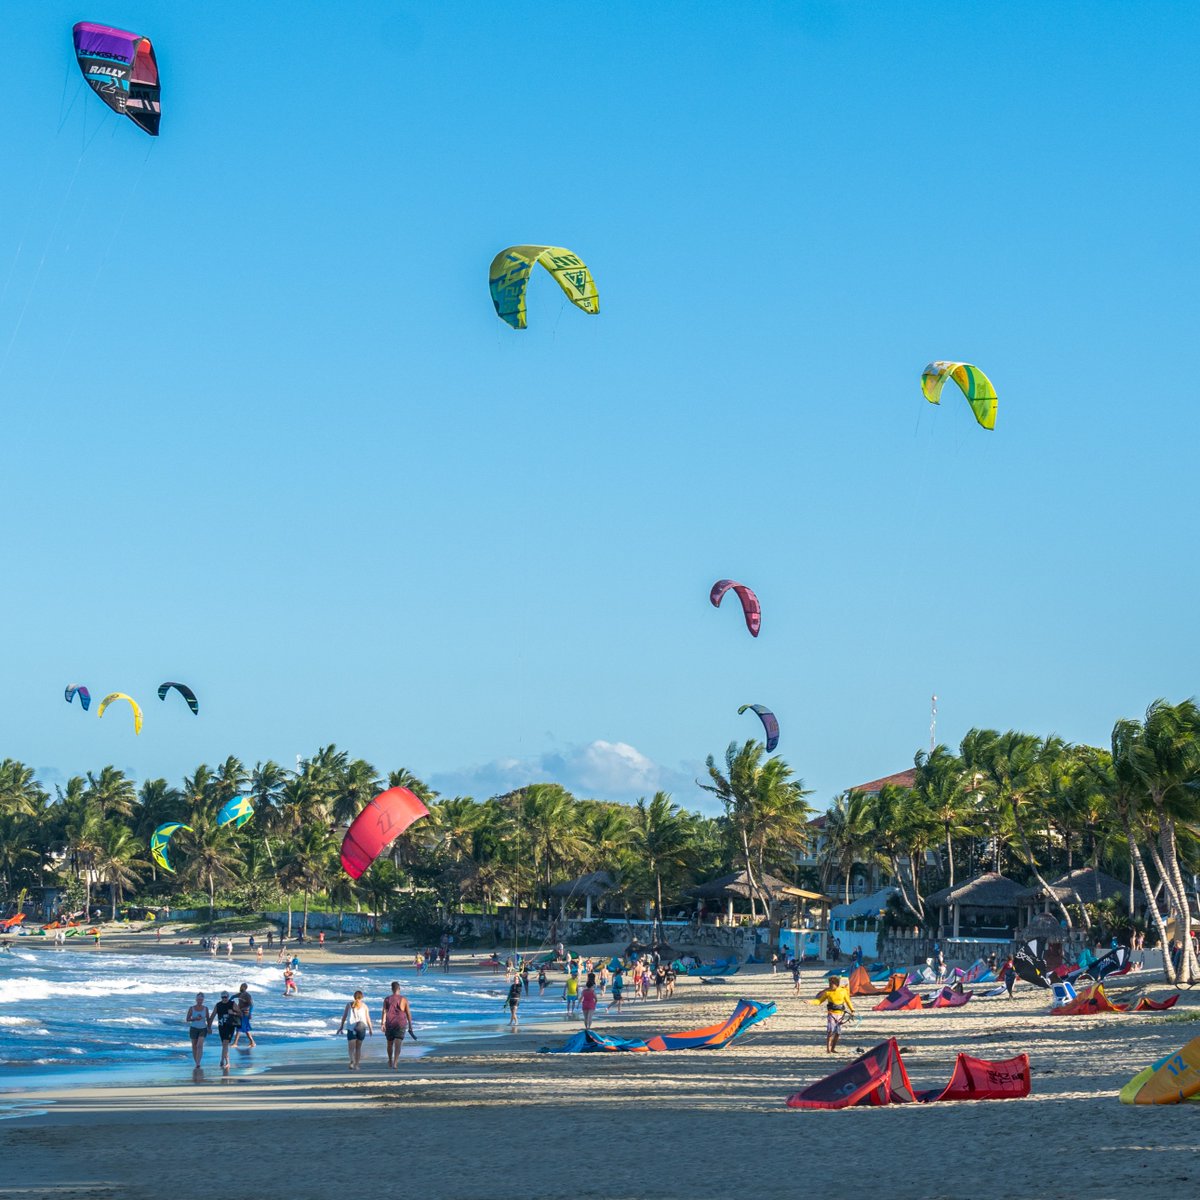 Did you know that #VivaTangerine by Wyndham is in one of the kitesurfing capitals of the world? Glide on over to Cabarete, Dominican Republic and ride the wind in the ultimate thrill-seeker’s paradise. 🌊🪁